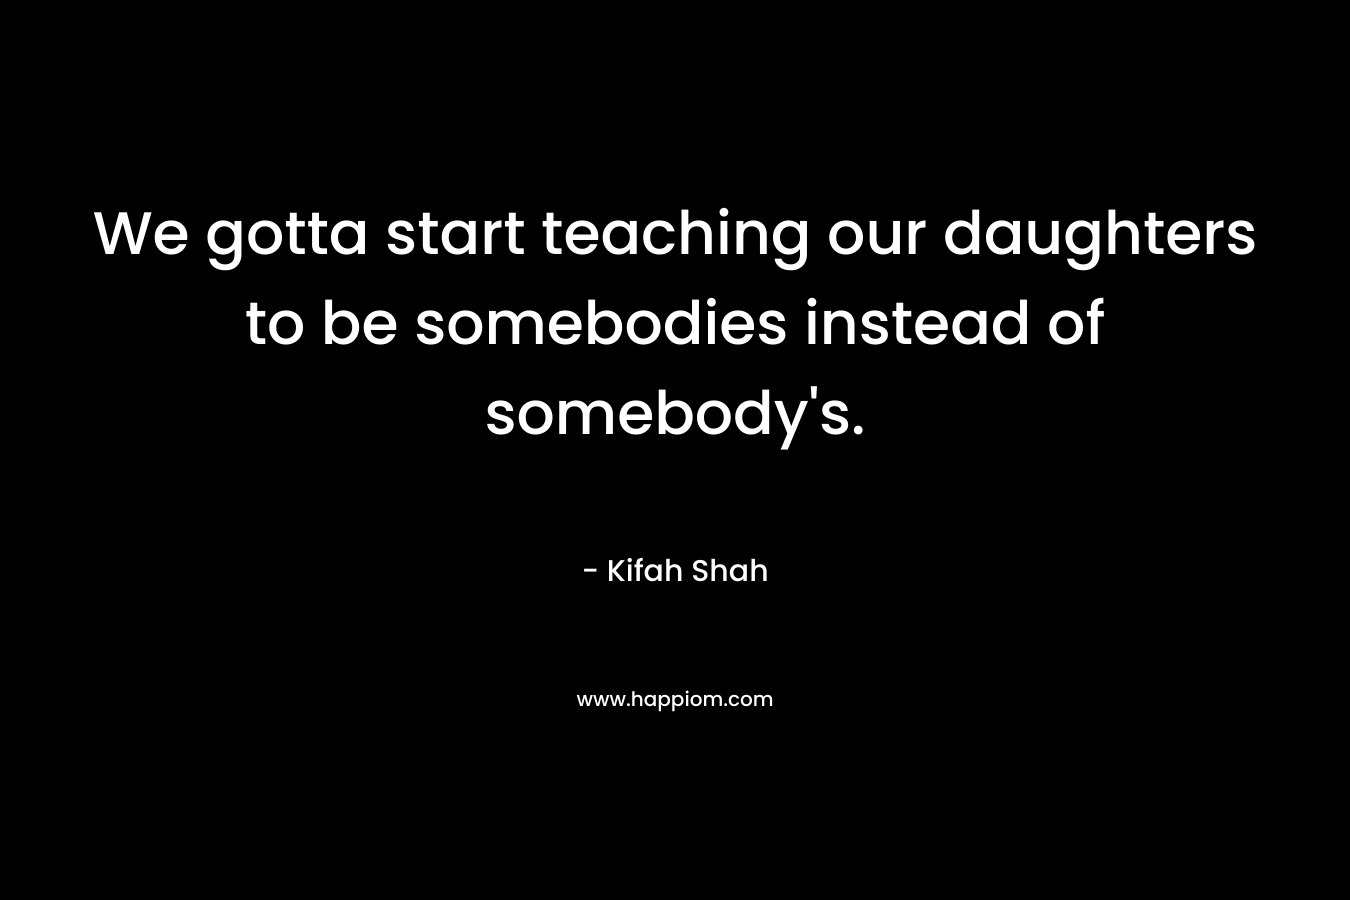 We gotta start teaching our daughters to be somebodies instead of somebody’s. – Kifah Shah